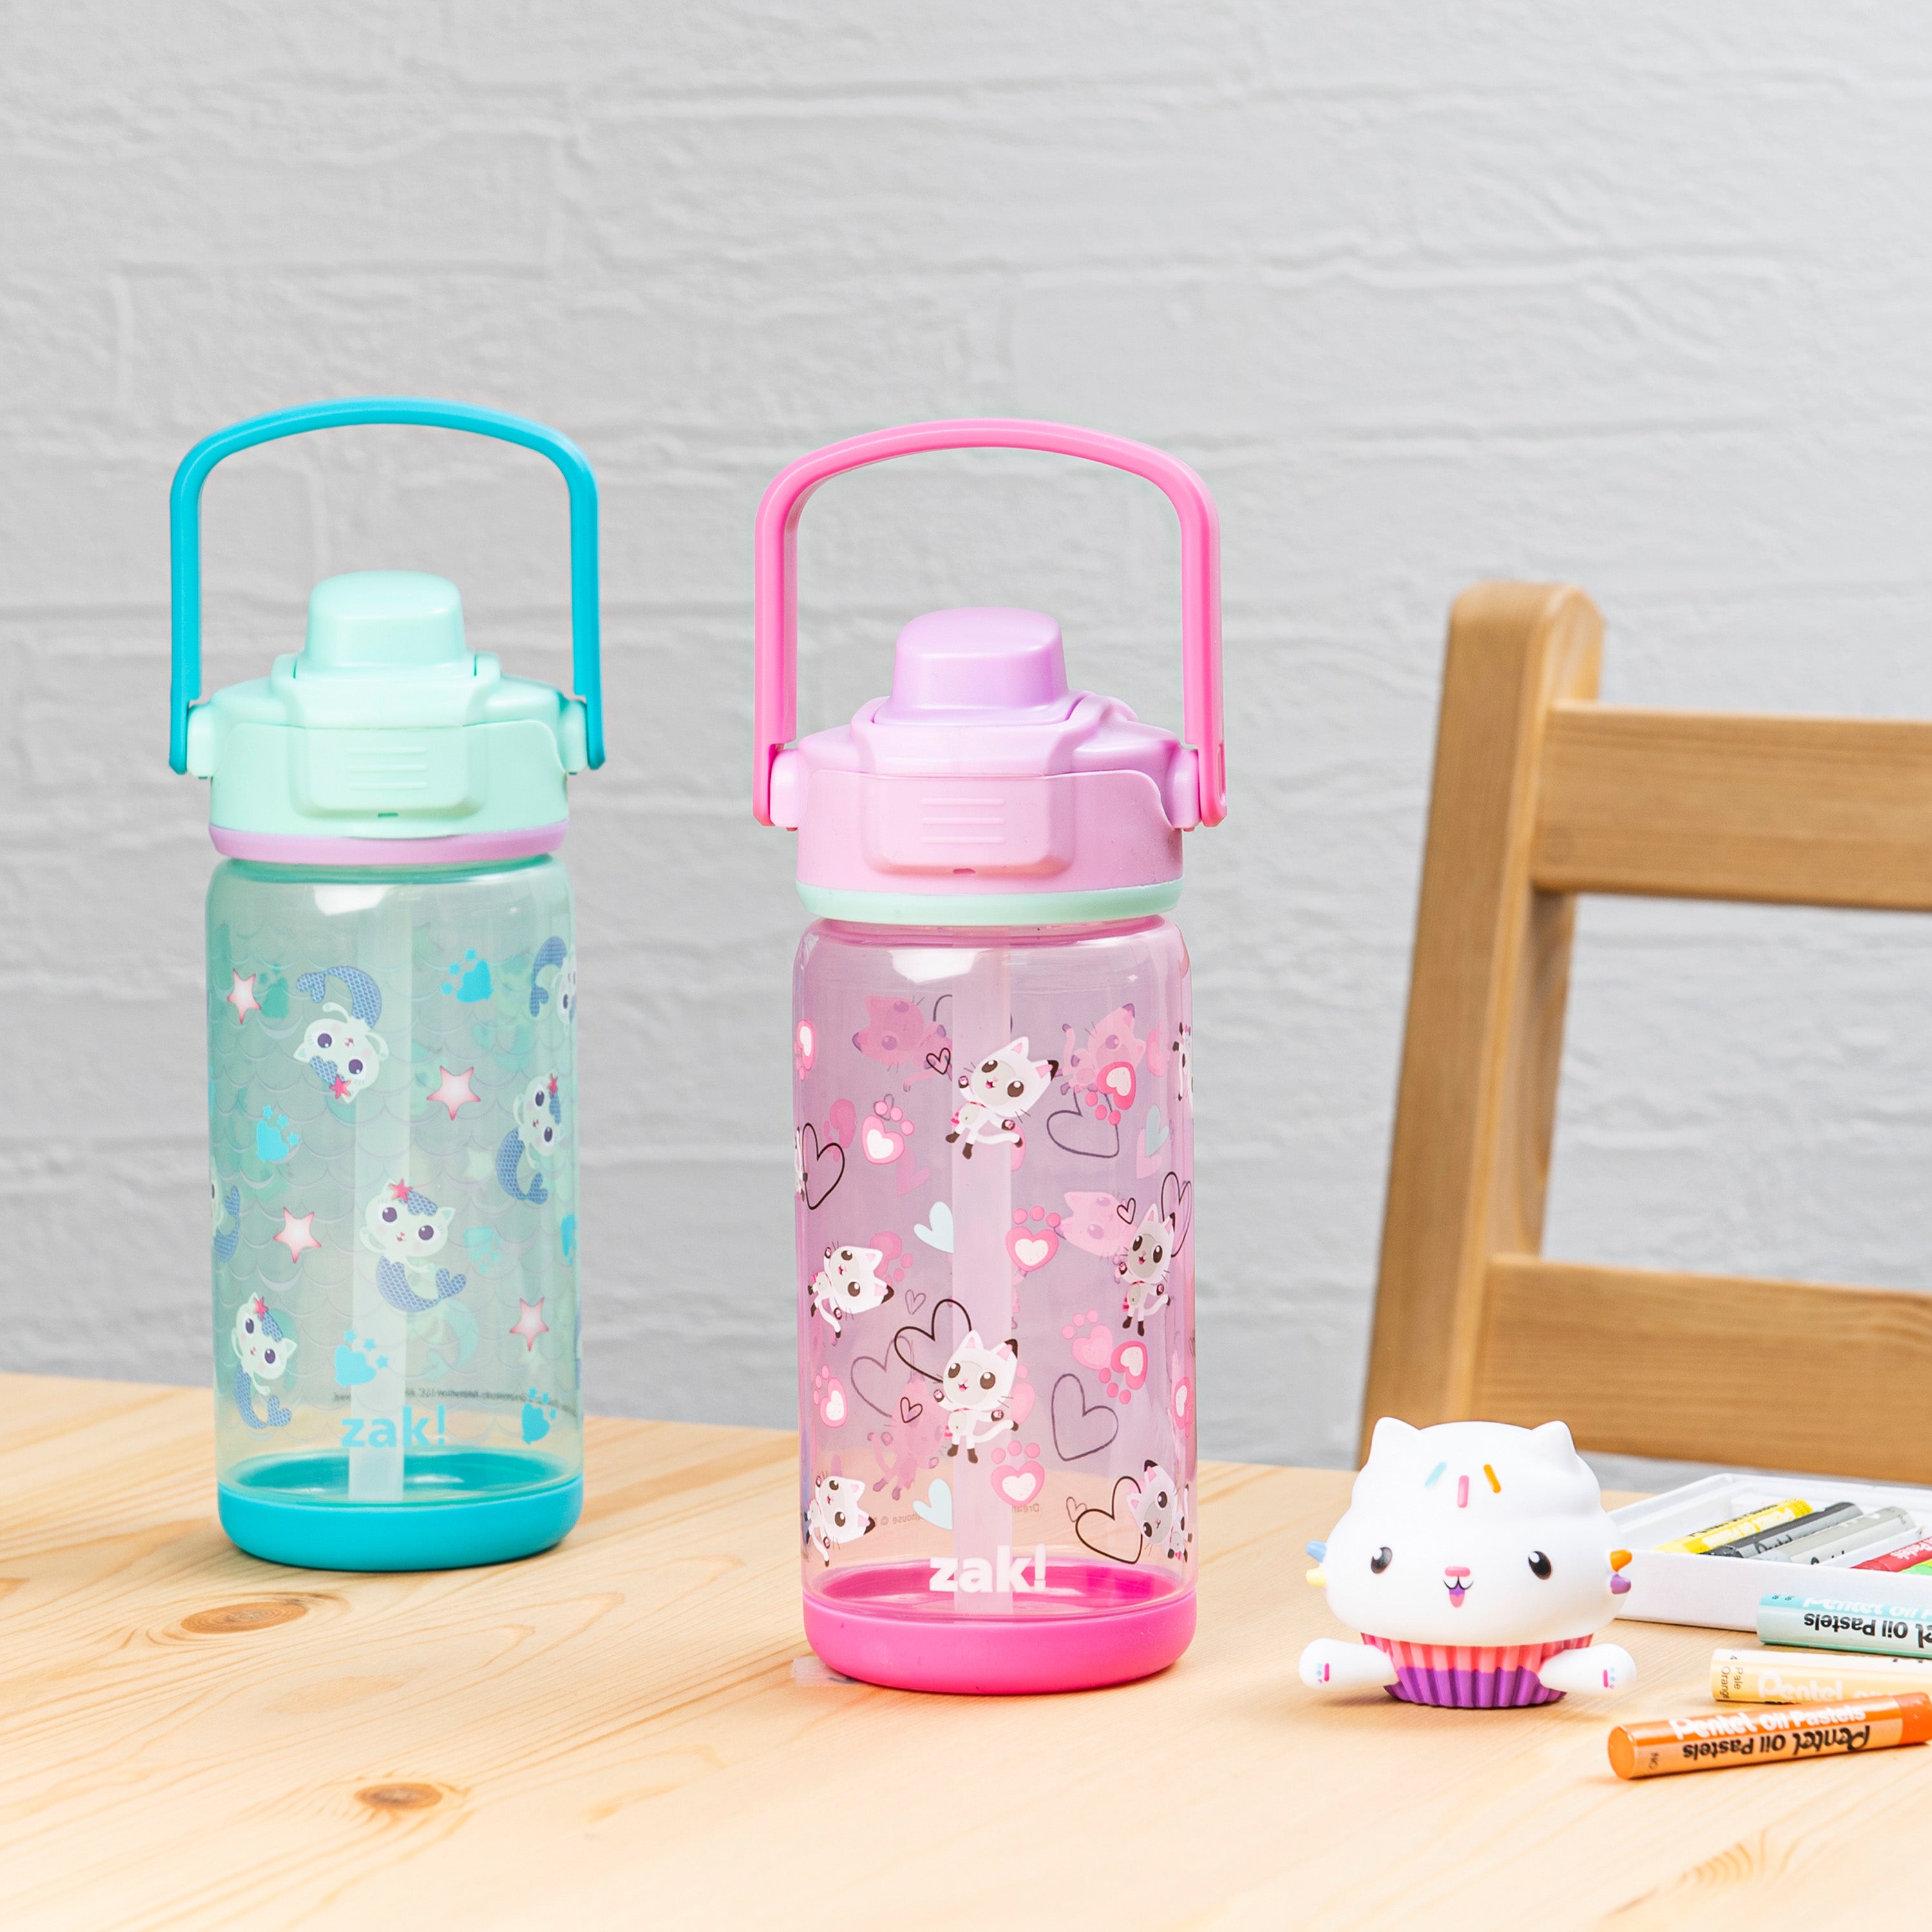 Gabby's Dollhouse Beacon 2-Piece Kids Water Bottle Set with Covered Spout, 16 Ounces